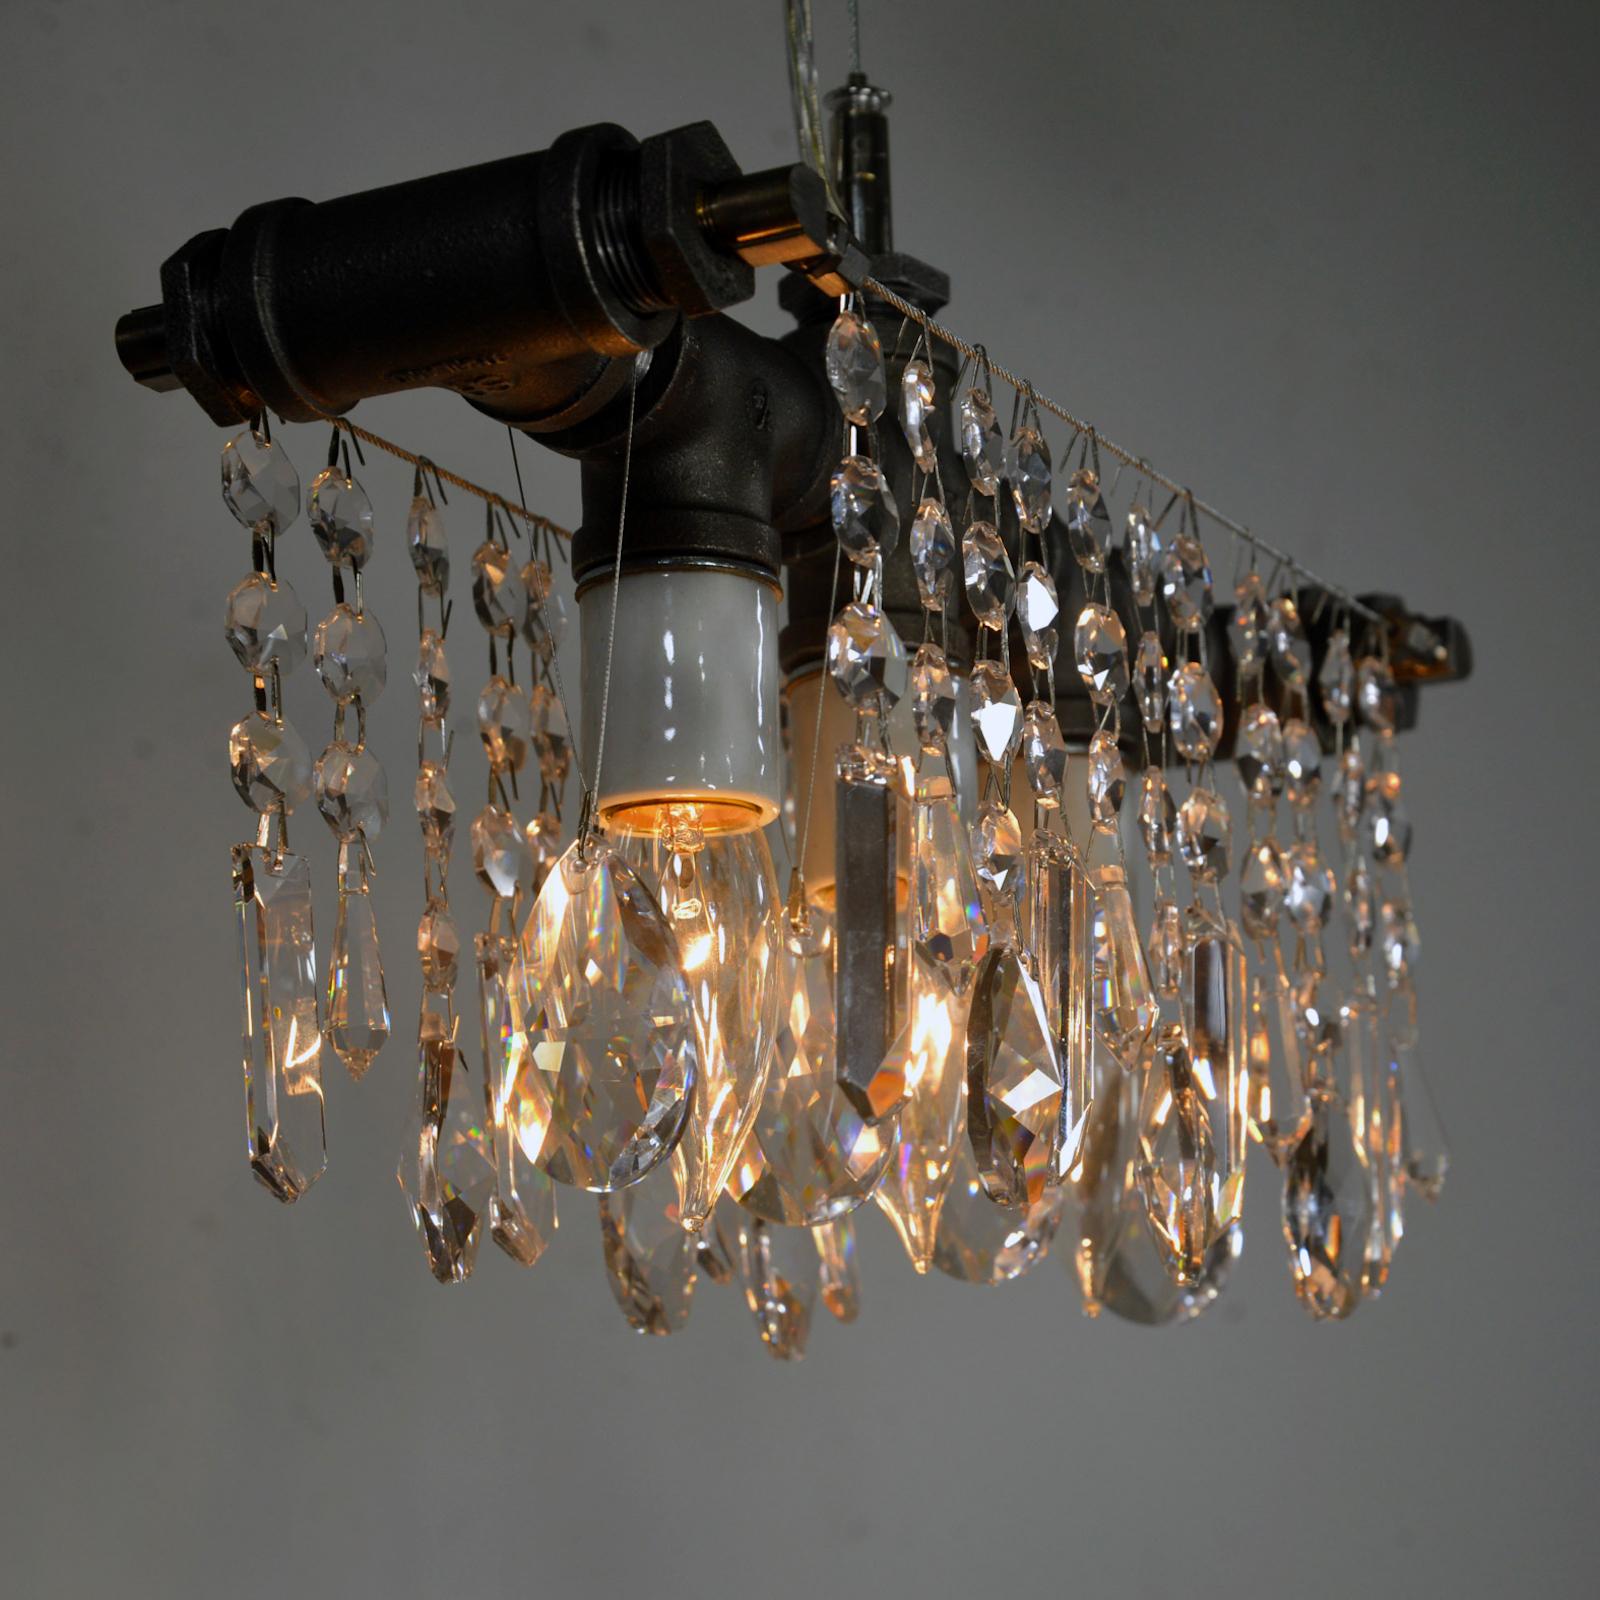 The industrial three bulb chandelier is a crystal lighting fixture that may be small but has an oversized personality. It gets the Michael McHale Designs formula of polished European crystals contrasting with rough industrial elements exactly right.